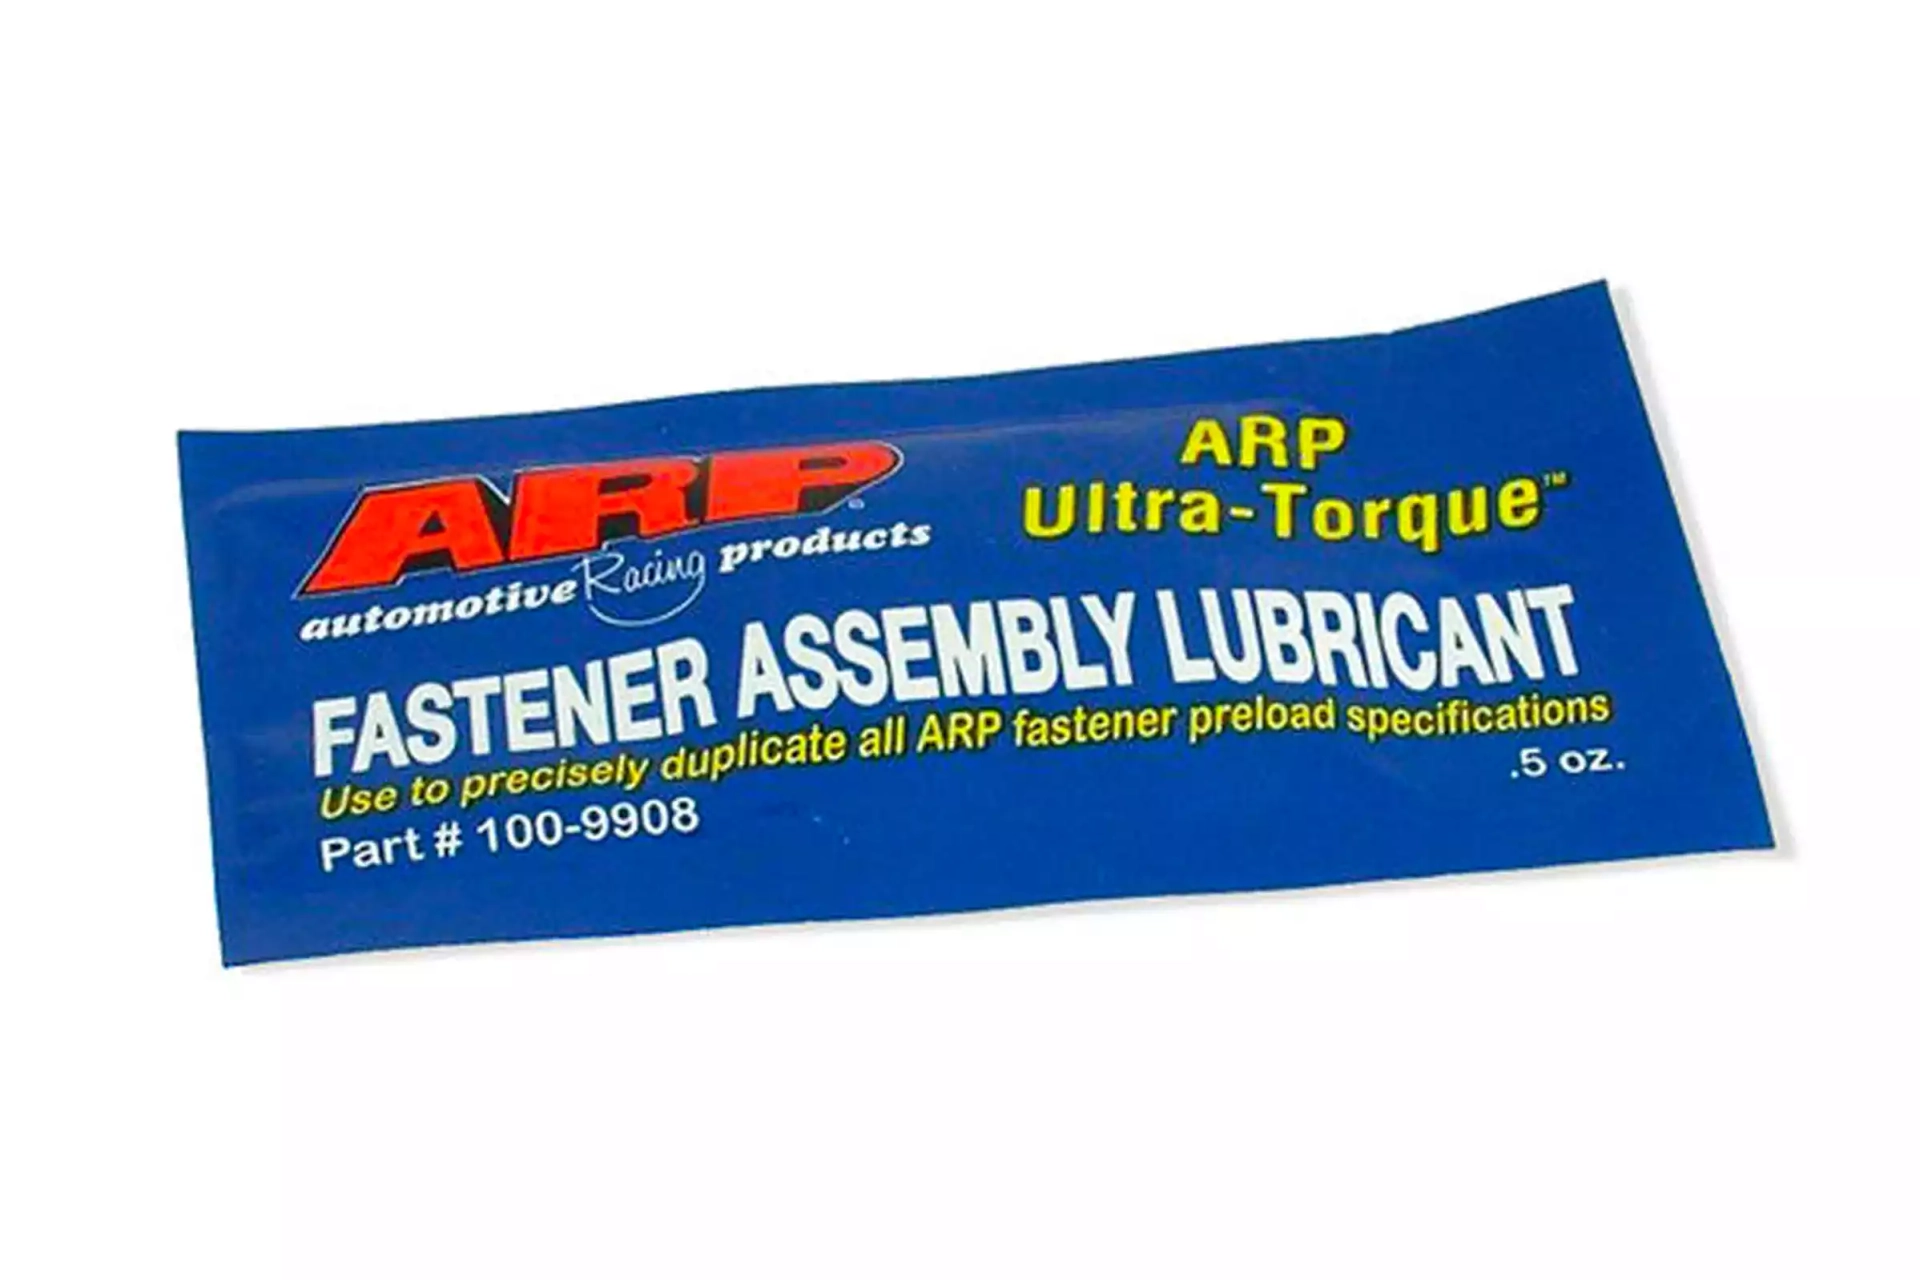 ARP Fastener Assemby Lubricant